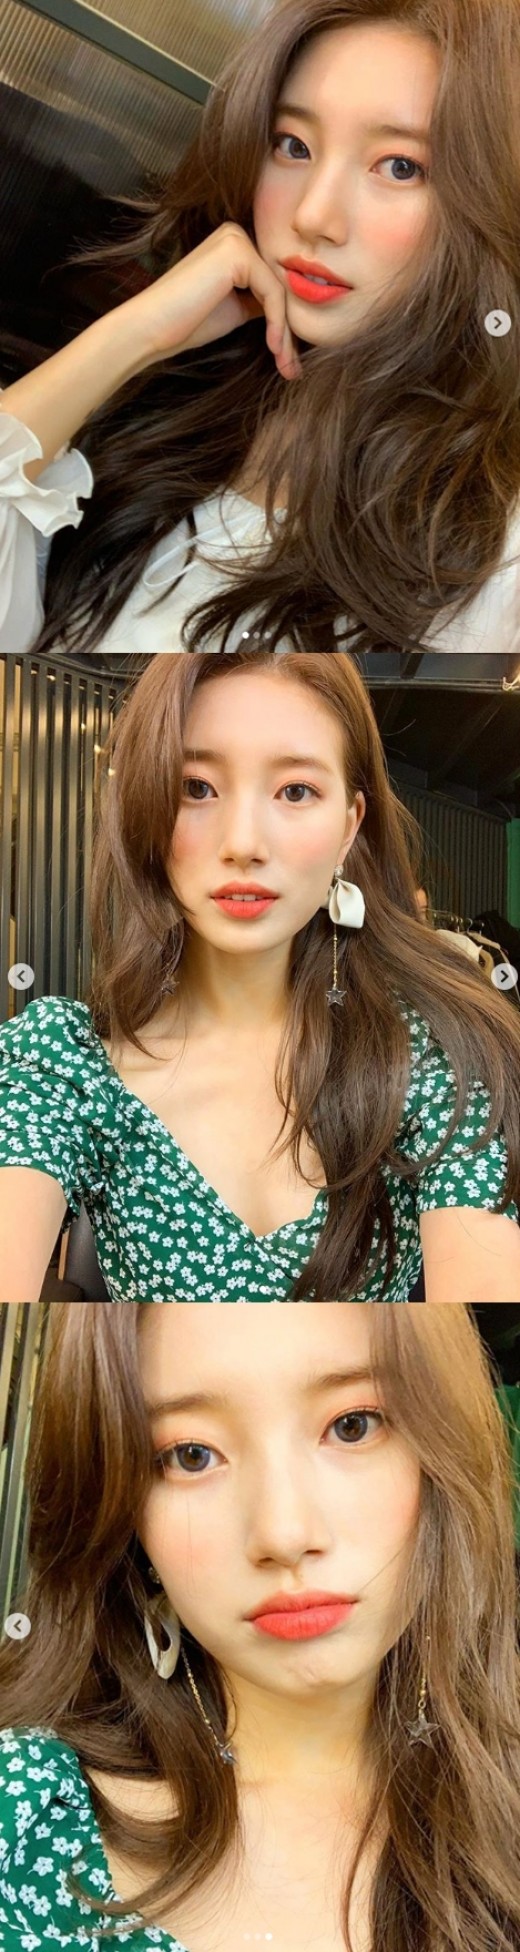 <p> Bae Suzy the Self to whats happening.</p><p>Bae Suzy is a 12 afternoon - at homein this photo with the post.</p><p>Posted photo UN Bae Suzy of Self favourite. Pure and sexy charm this exudes. Ugh sound, Beautiful looks, called reaction.</p><p>Bae Suzy is Lee Seung-gi and breathing together for the SBS drama The Vagabondin the next year to comeback.</p>